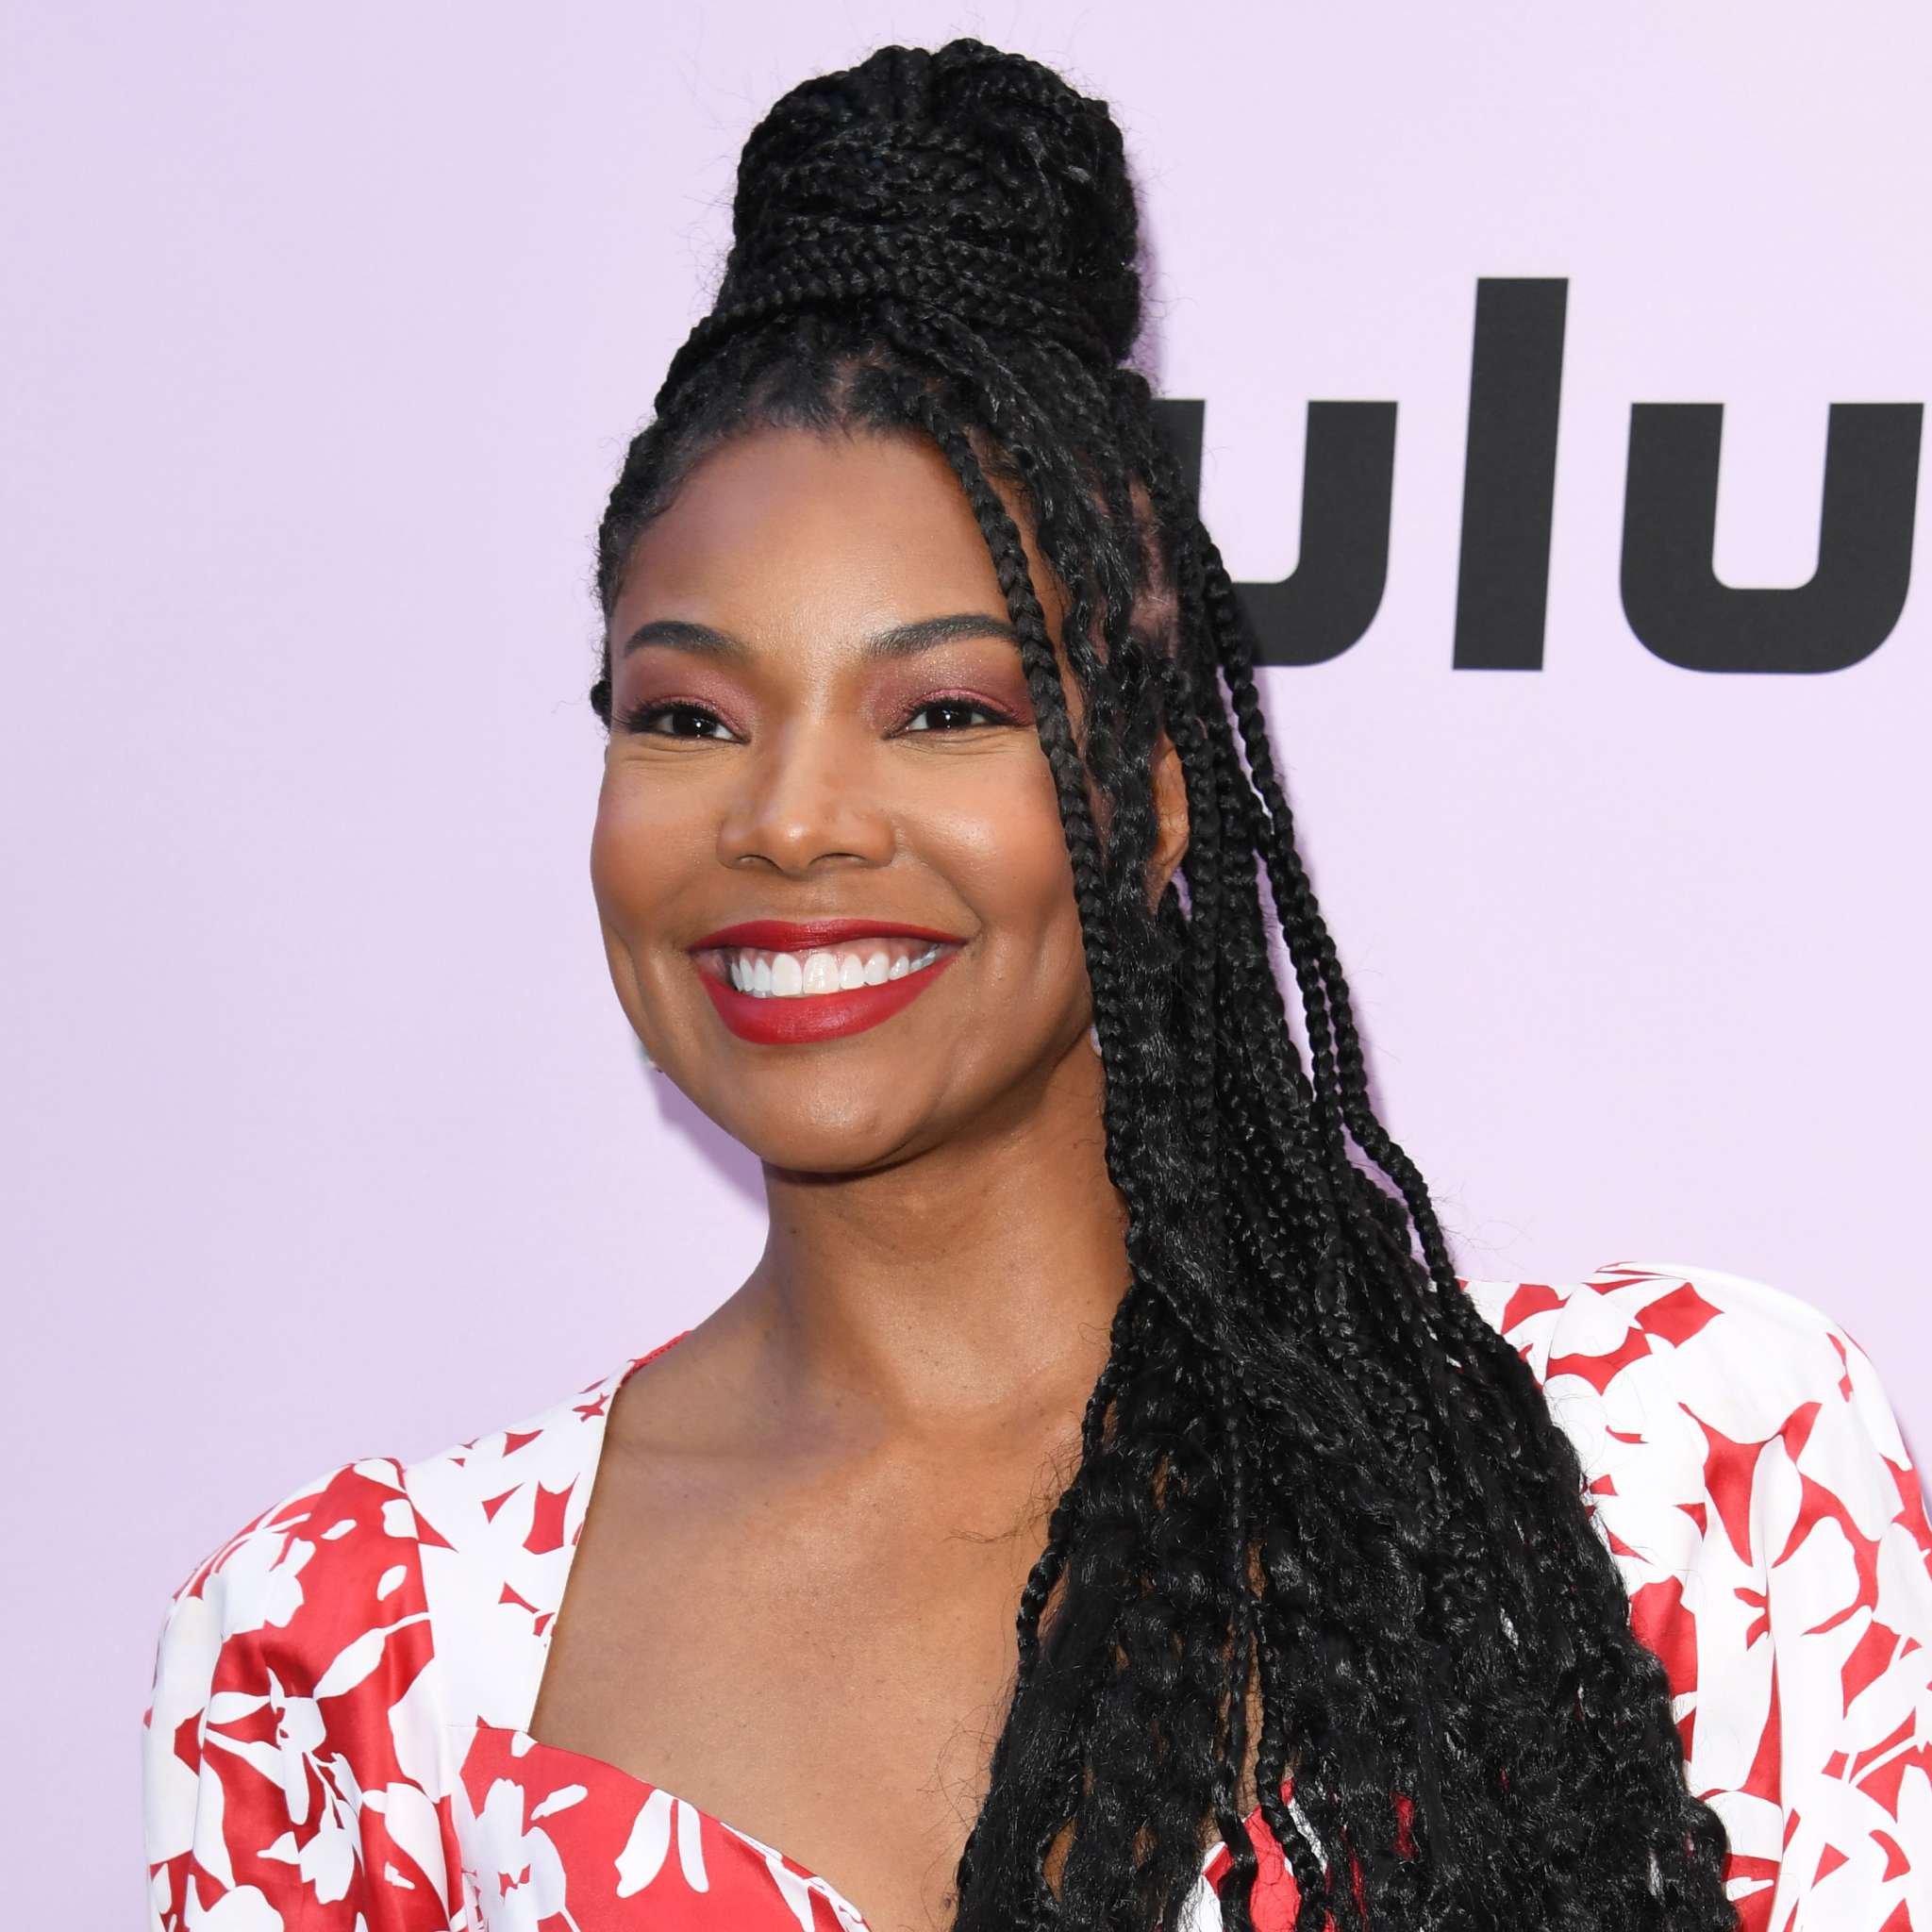 gabrielle-union-gushes-over-lady-london-and-pens-an-emotional-message